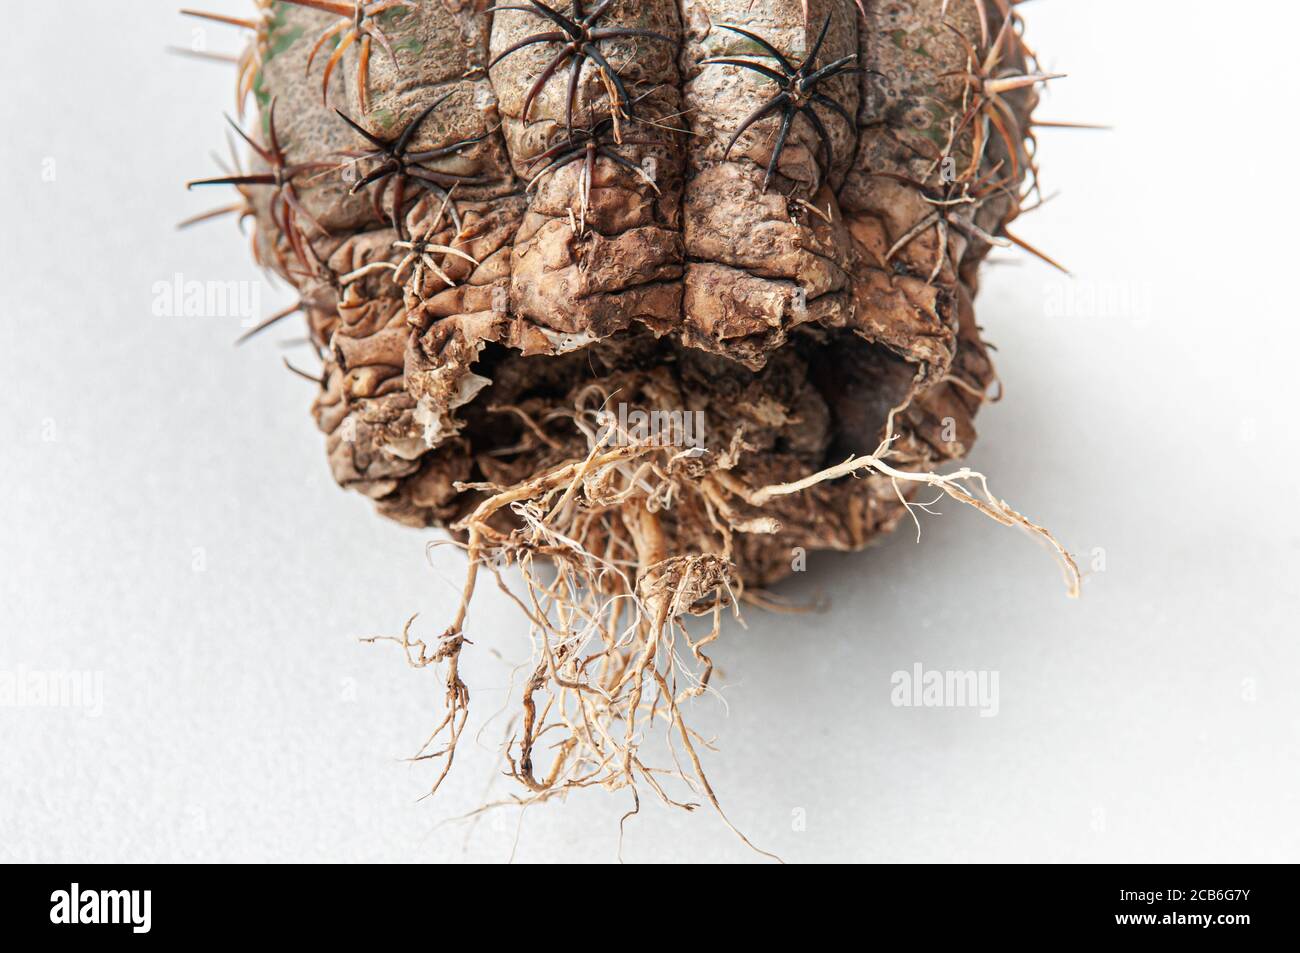 Cactus disease dry root rot caused by fungi, severe damage fungi infected Gymnocalycium cactus isolated on white background showing serious damge at s Stock Photo